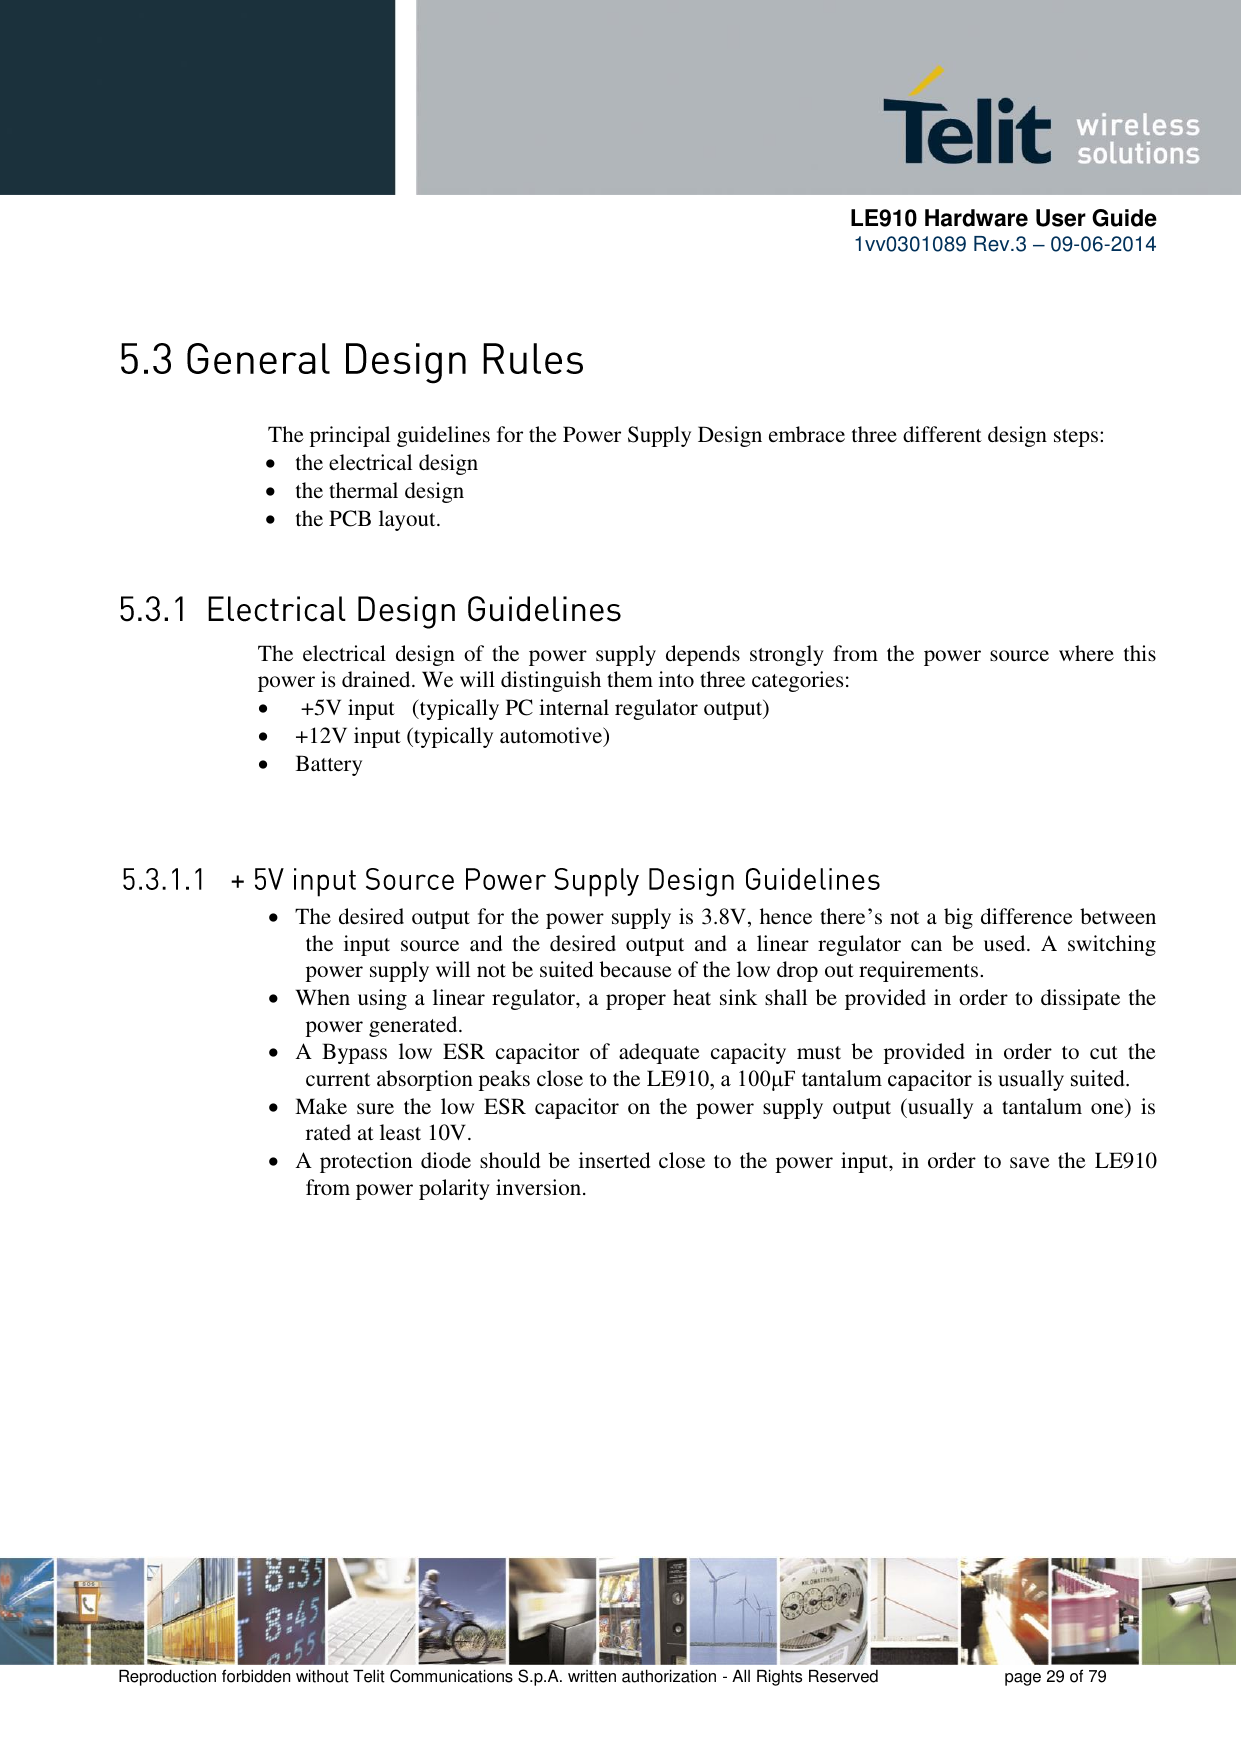      LE910 Hardware User Guide 1vv0301089 Rev.3 – 09-06-2014    Reproduction forbidden without Telit Communications S.p.A. written authorization - All Rights Reserved    page 29 of 79    The principal guidelines for the Power Supply Design embrace three different design steps:  the electrical design  the thermal design  the PCB layout.  The electrical design of the power supply depends strongly from the  power source where this power is drained. We will distinguish them into three categories:   +5V input   (typically PC internal regulator output)  +12V input (typically automotive)  Battery   The desired output for the power supply is 3.8V, hence there’s not a big difference between the  input  source  and  the  desired  output  and  a  linear  regulator  can  be  used.  A  switching power supply will not be suited because of the low drop out requirements.  When using a linear regulator, a proper heat sink shall be provided in order to dissipate the power generated.  A  Bypass  low  ESR  capacitor  of  adequate  capacity  must  be  provided  in  order  to  cut  the current absorption peaks close to the LE910, a 100μF tantalum capacitor is usually suited.  Make sure  the low ESR capacitor on the  power supply output (usually a tantalum one)  is rated at least 10V.  A protection diode should be inserted close to the power input, in order to save the  LE910 from power polarity inversion. 